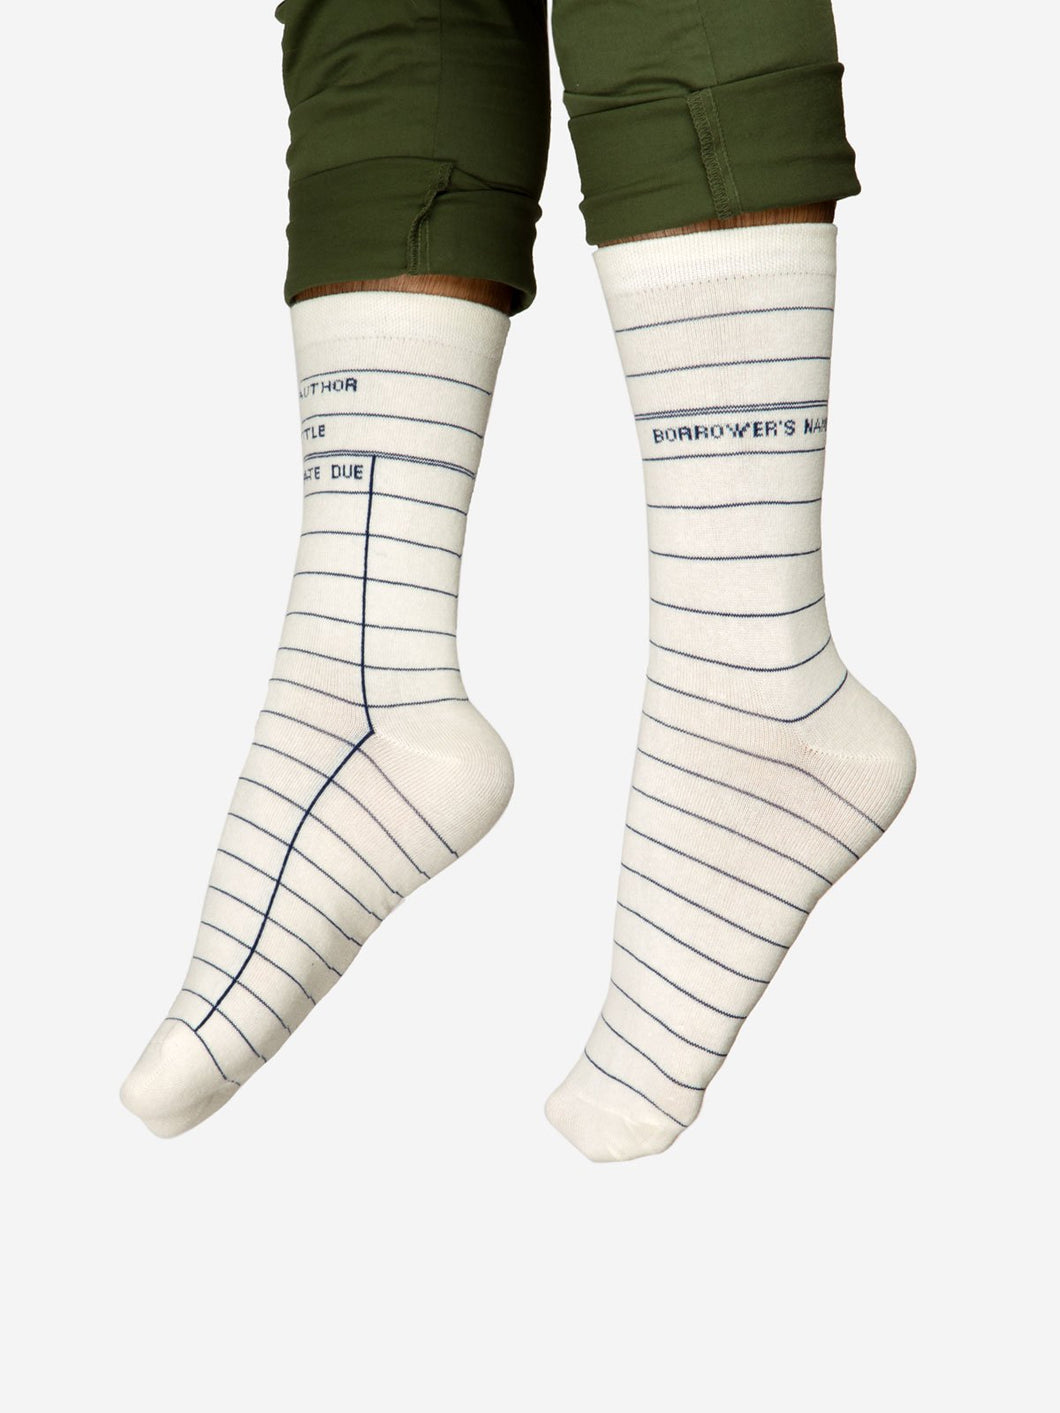 Library Card White Socks (Adult)